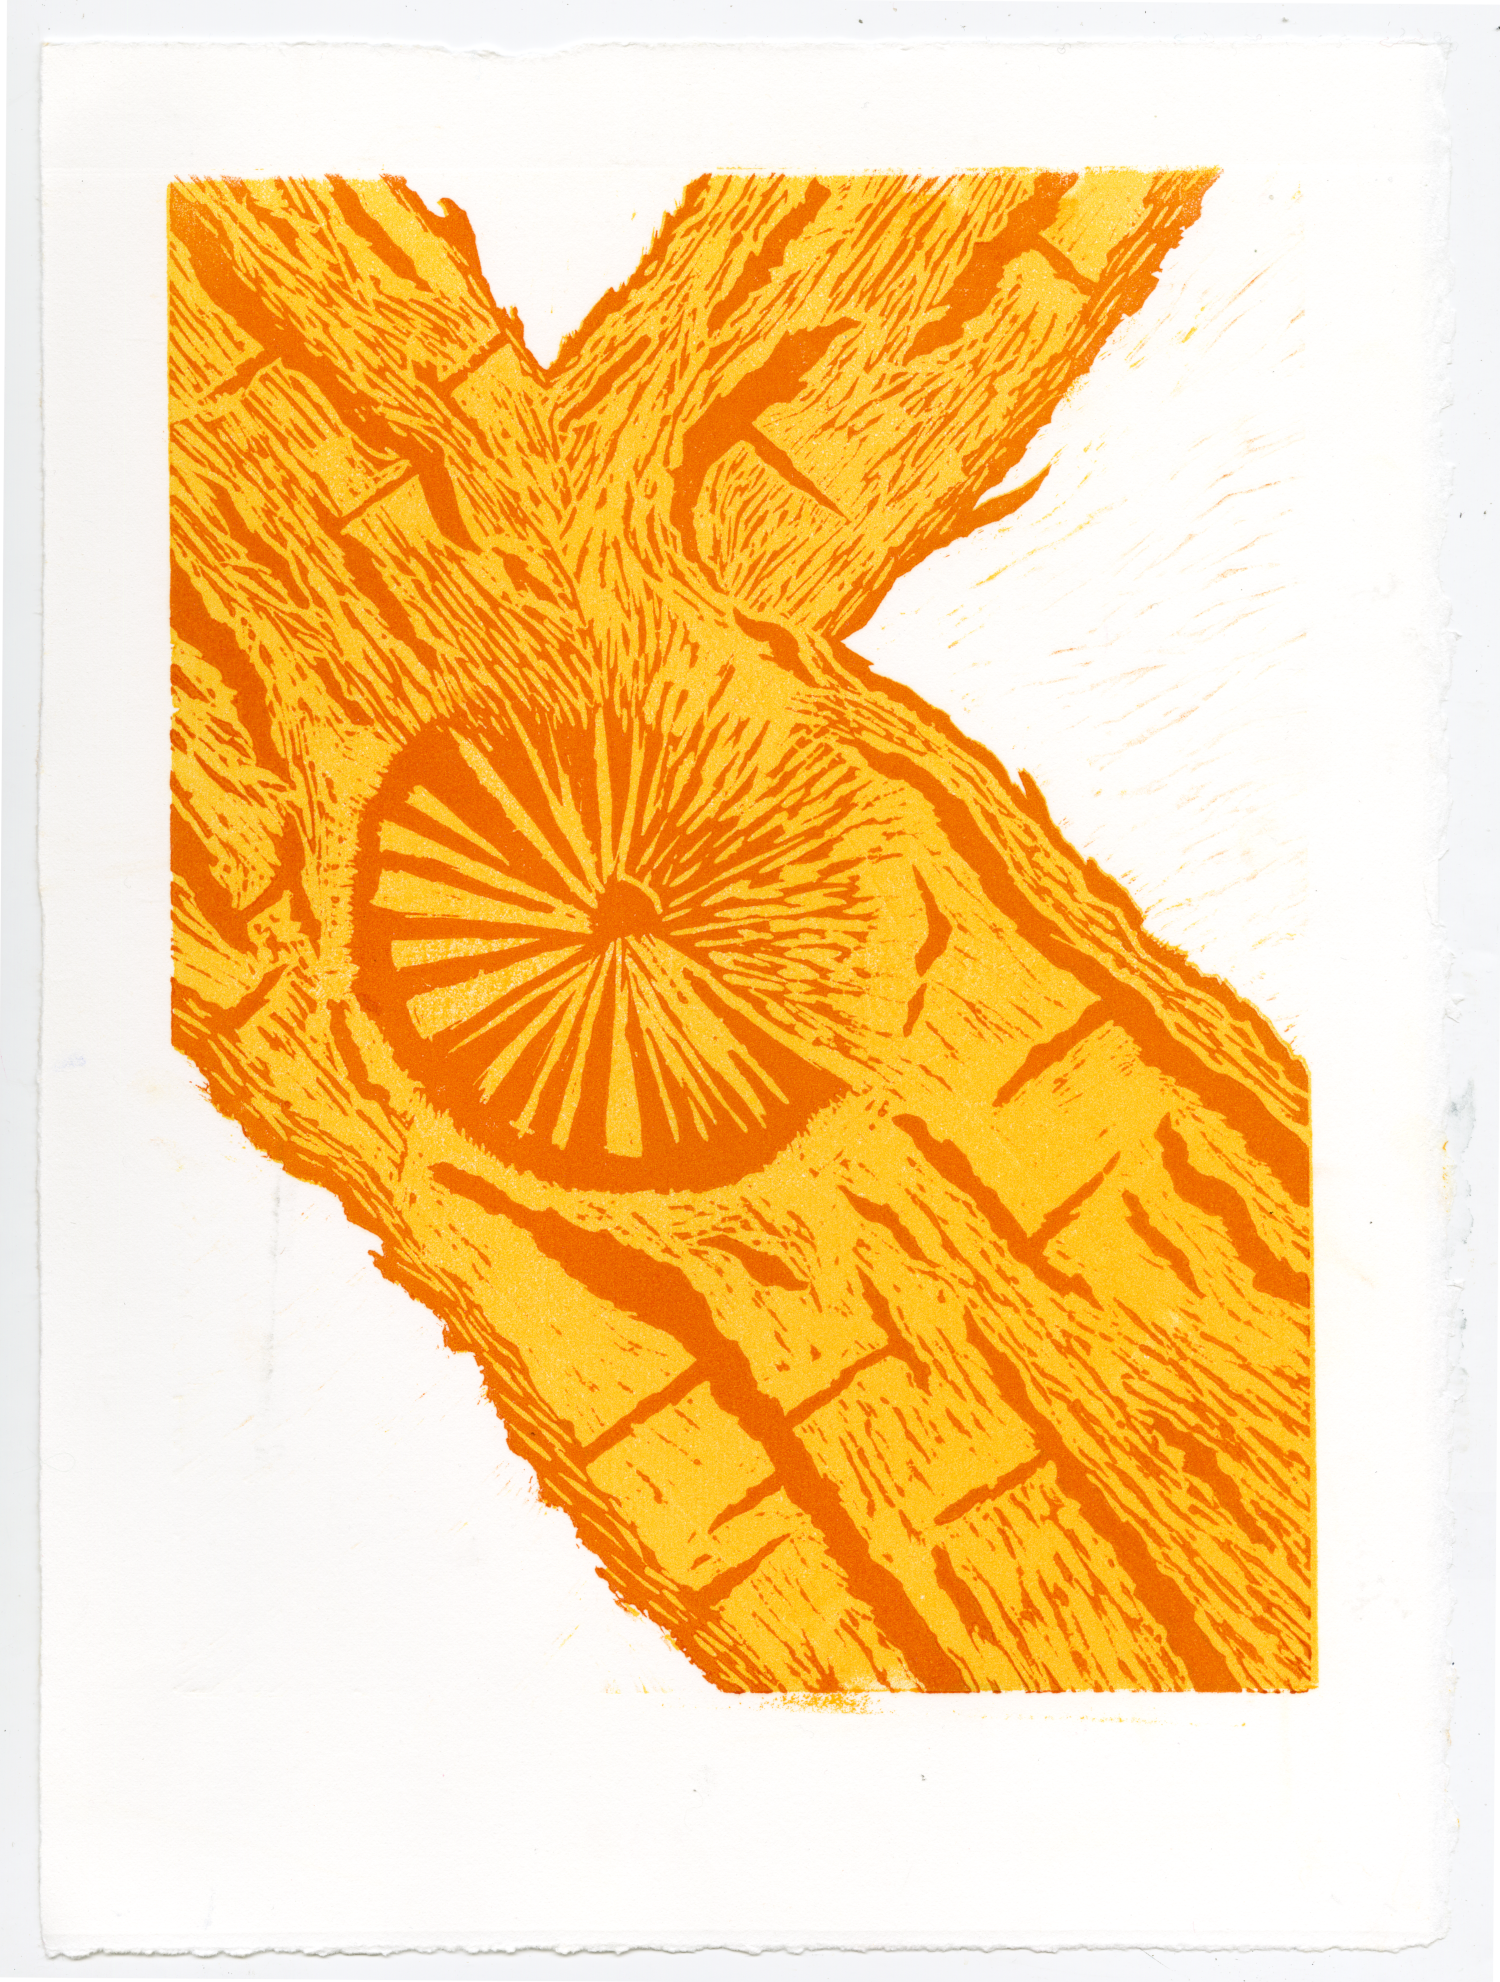 yellow and orange linoleum block print of a tree branching with a burl in the center.